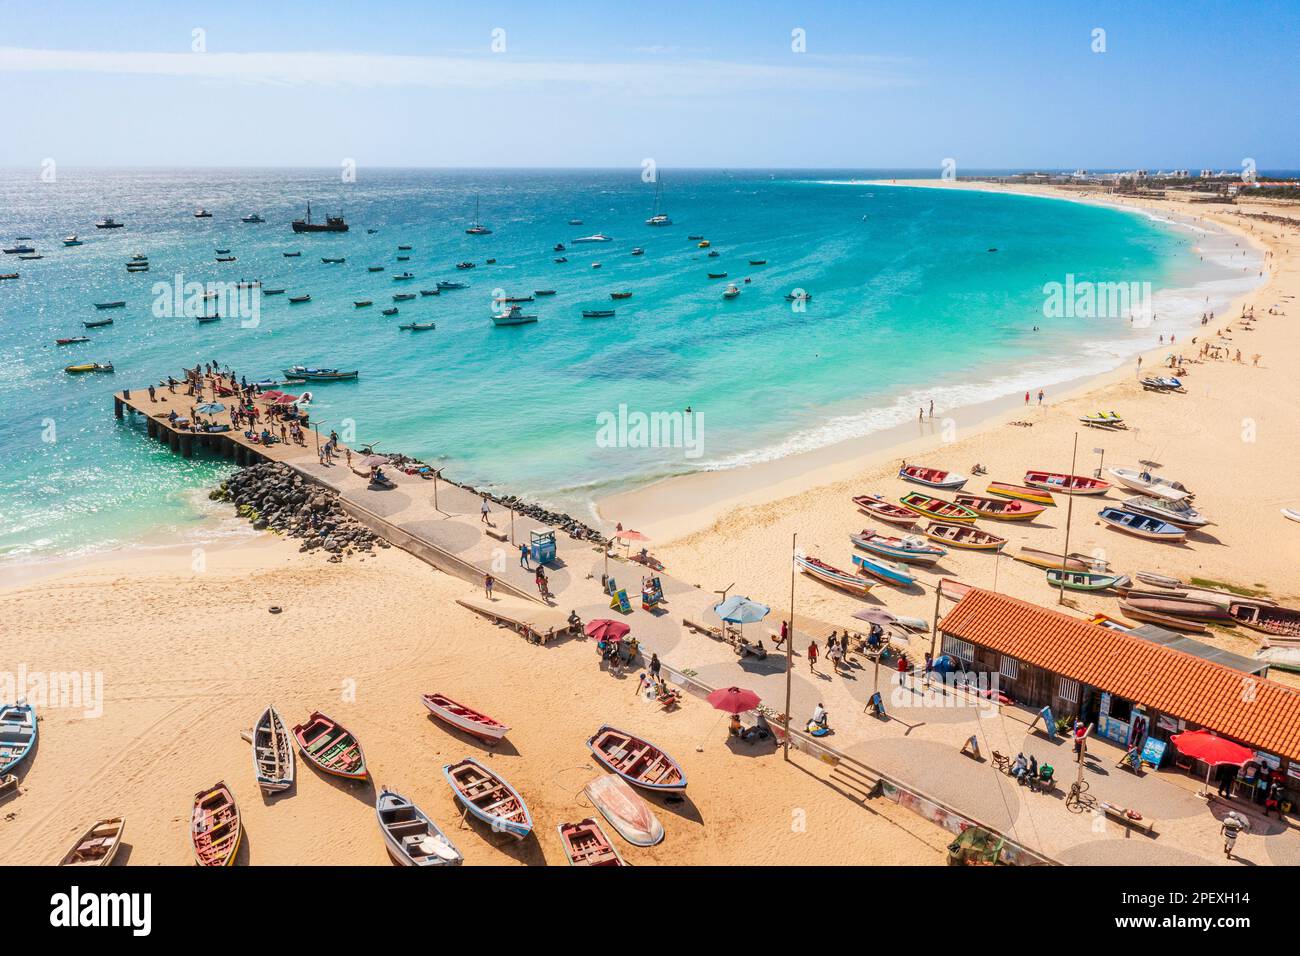 Pier and boats on turquoise water in city of Santa Maria, island of Sal, Cape Verde Stock Photo